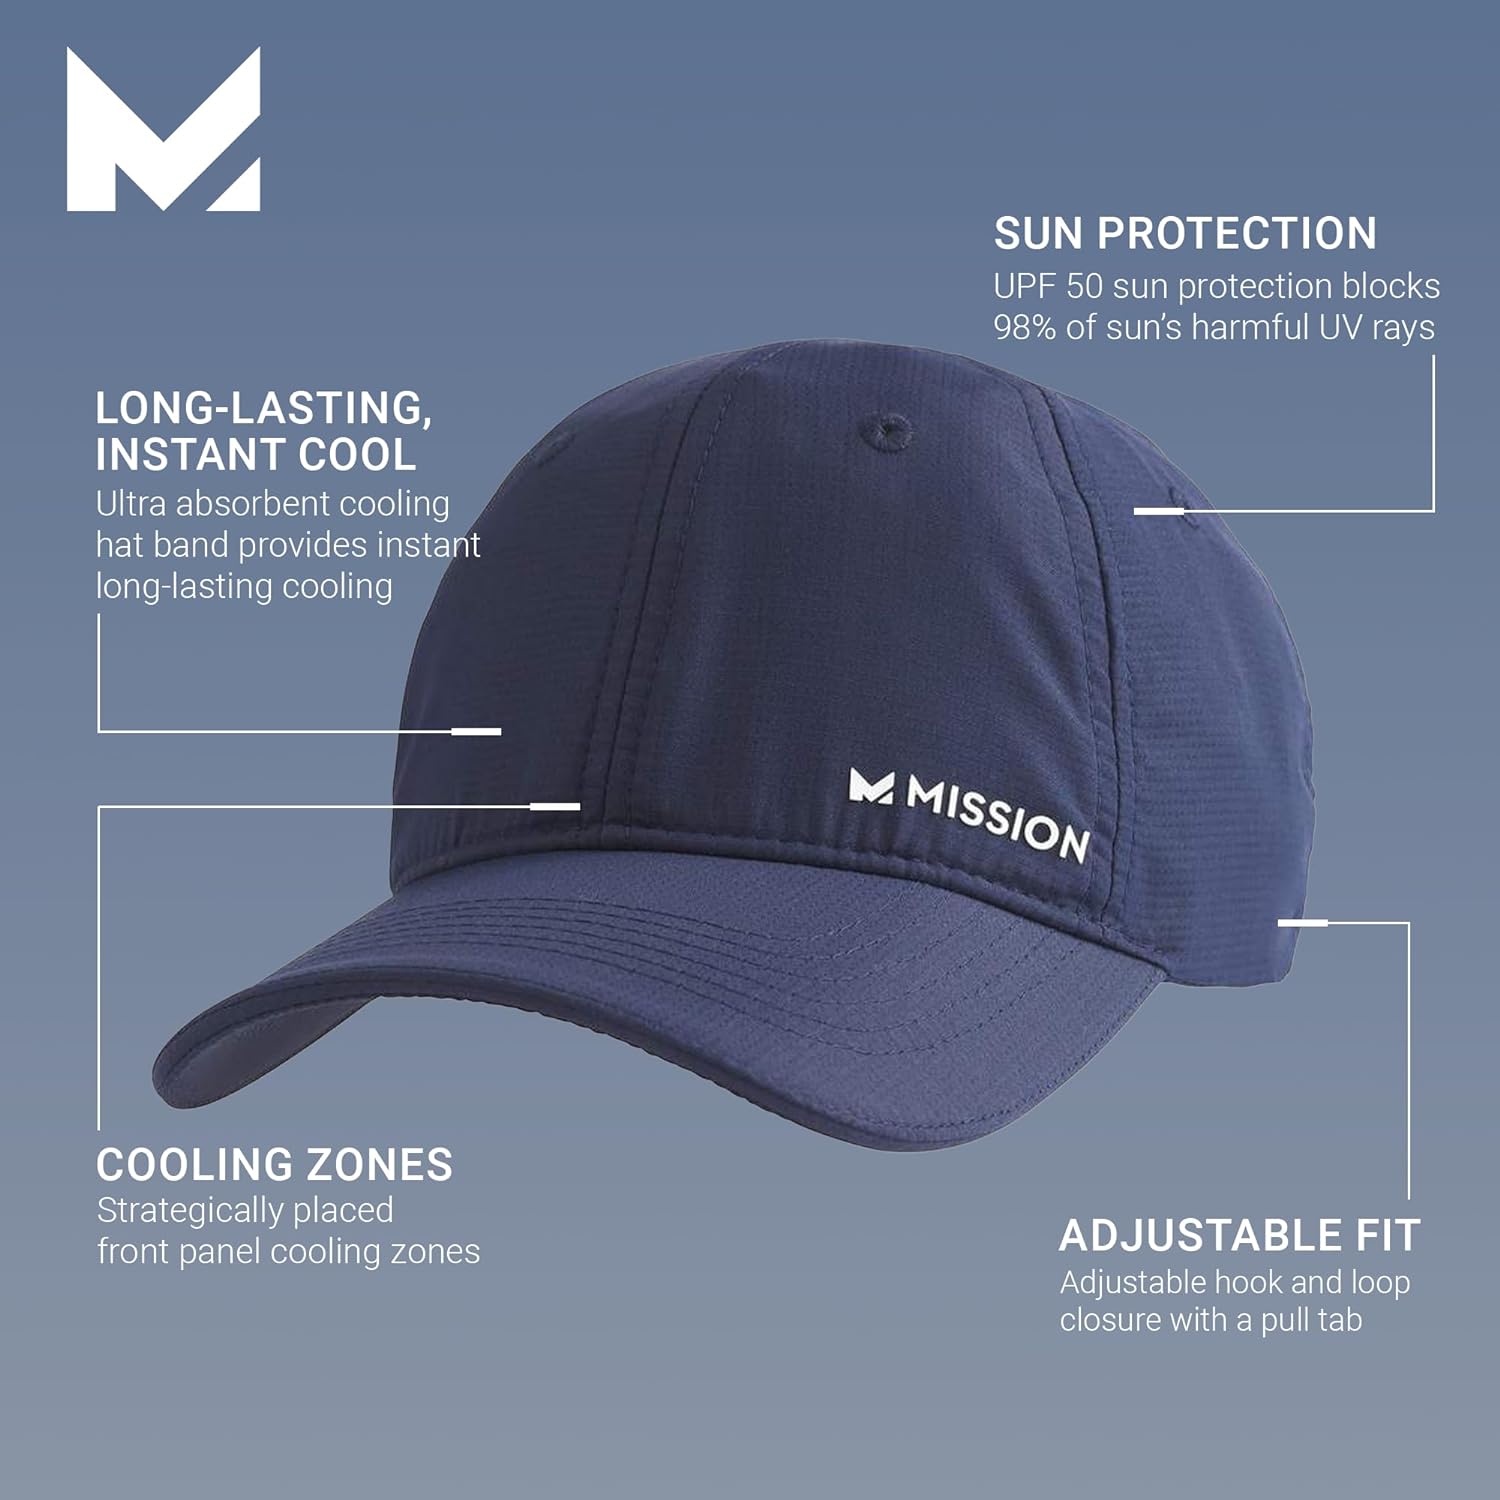 MISSION Cooling Performance Hat - Unisex Baseball Cap for Men and Women - Instant-Cooling Fabric, Adjustable Fit